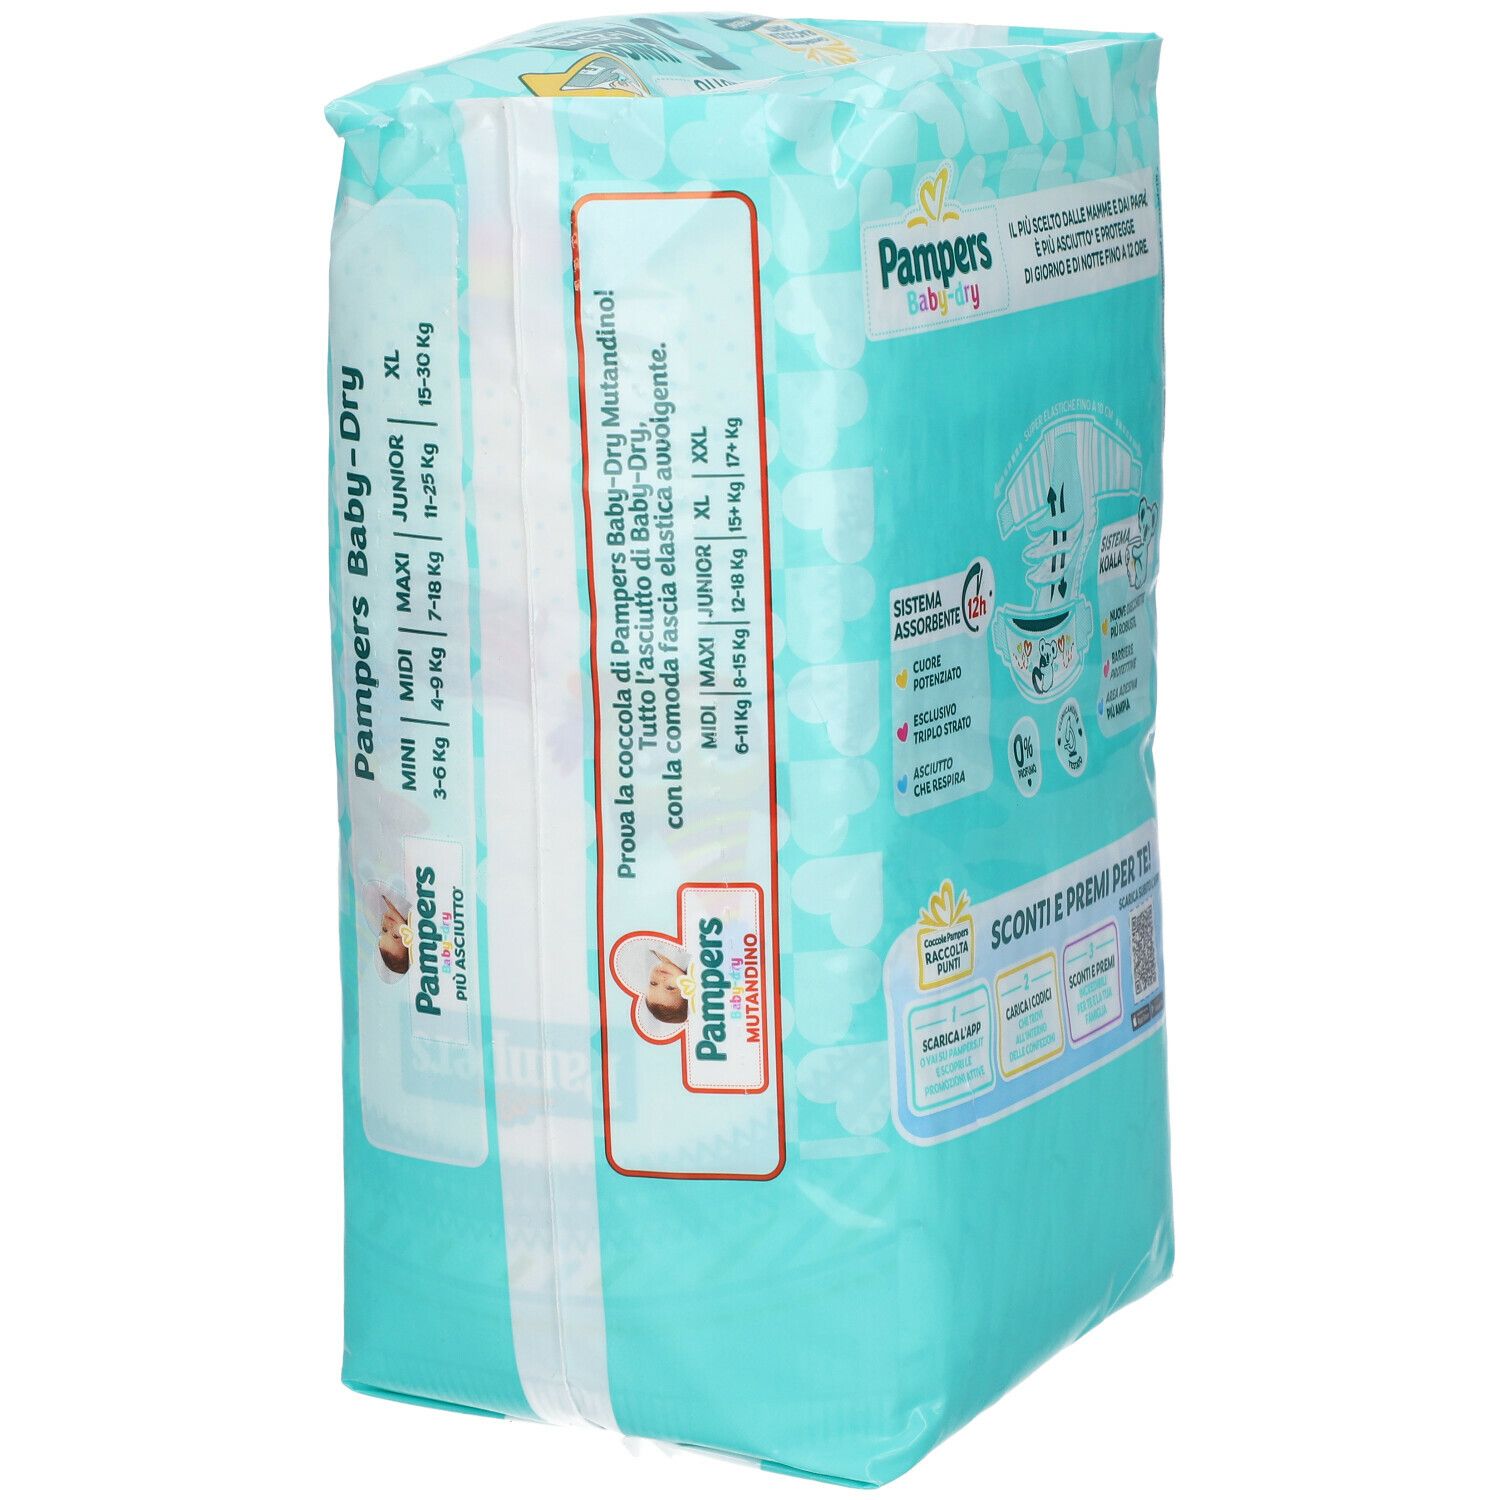 Pampers Baby Dry Junior